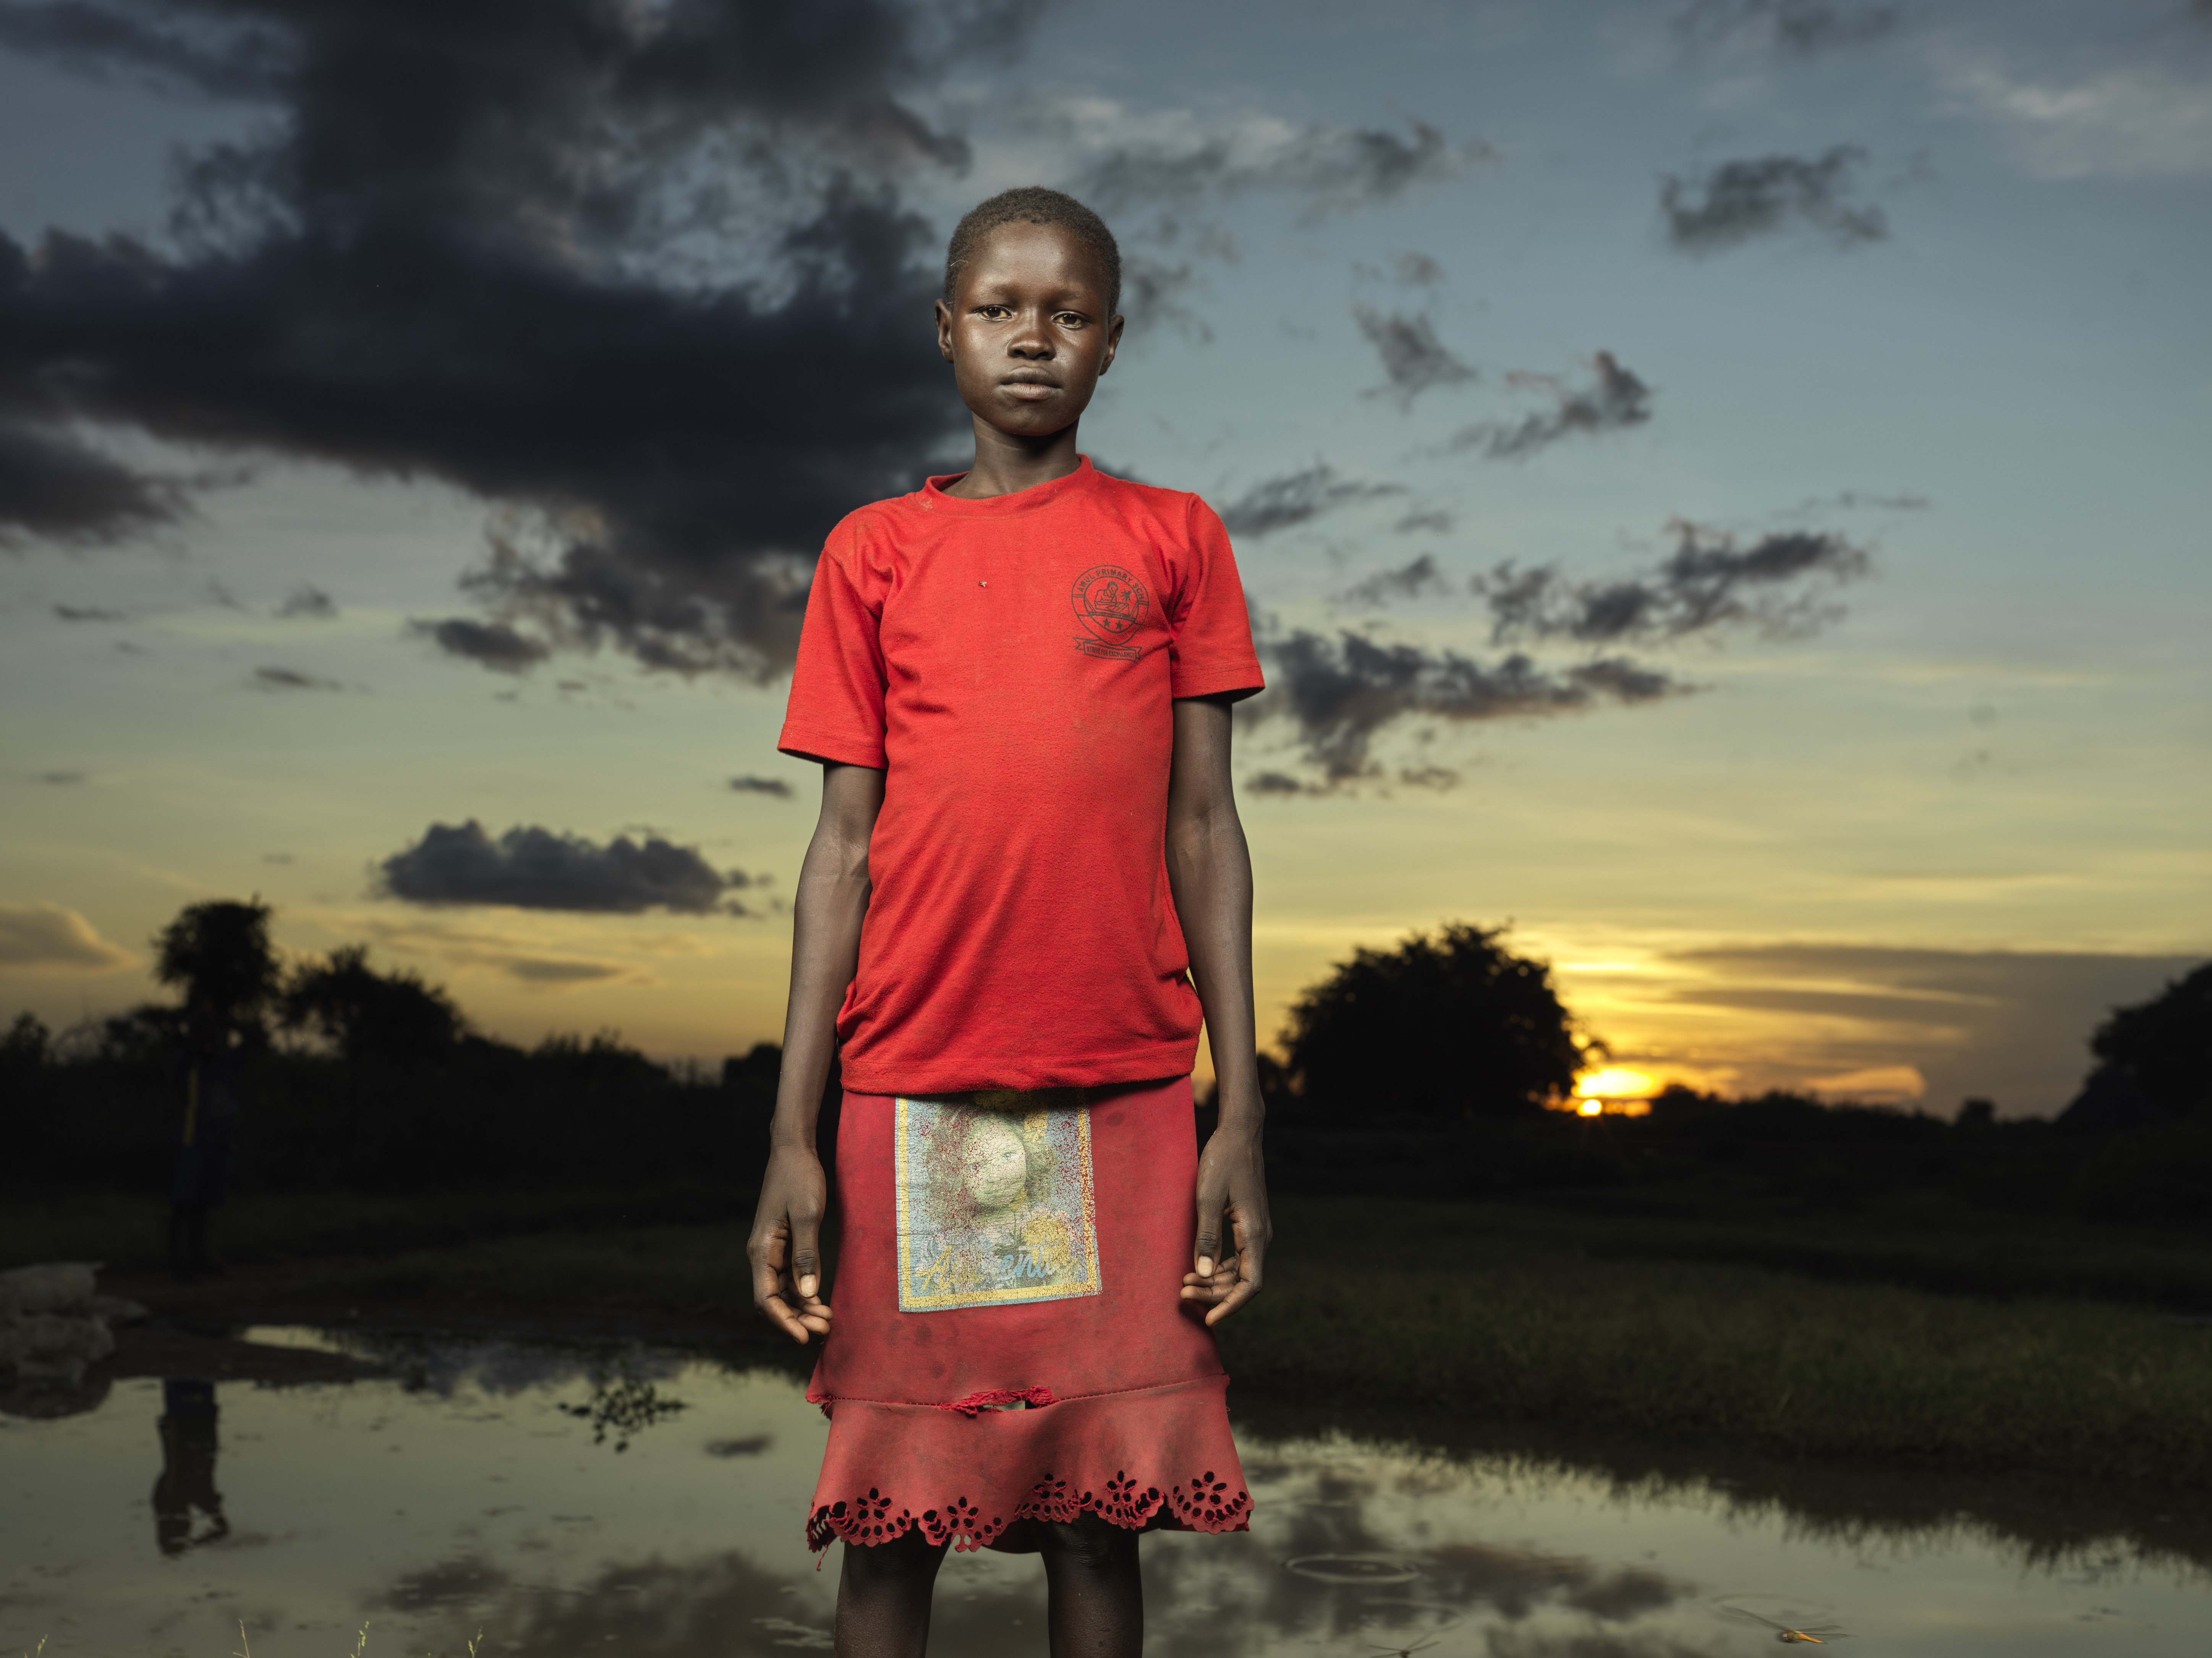 A girl form South Sudan wearing a bright red dress poses in front of a sunset